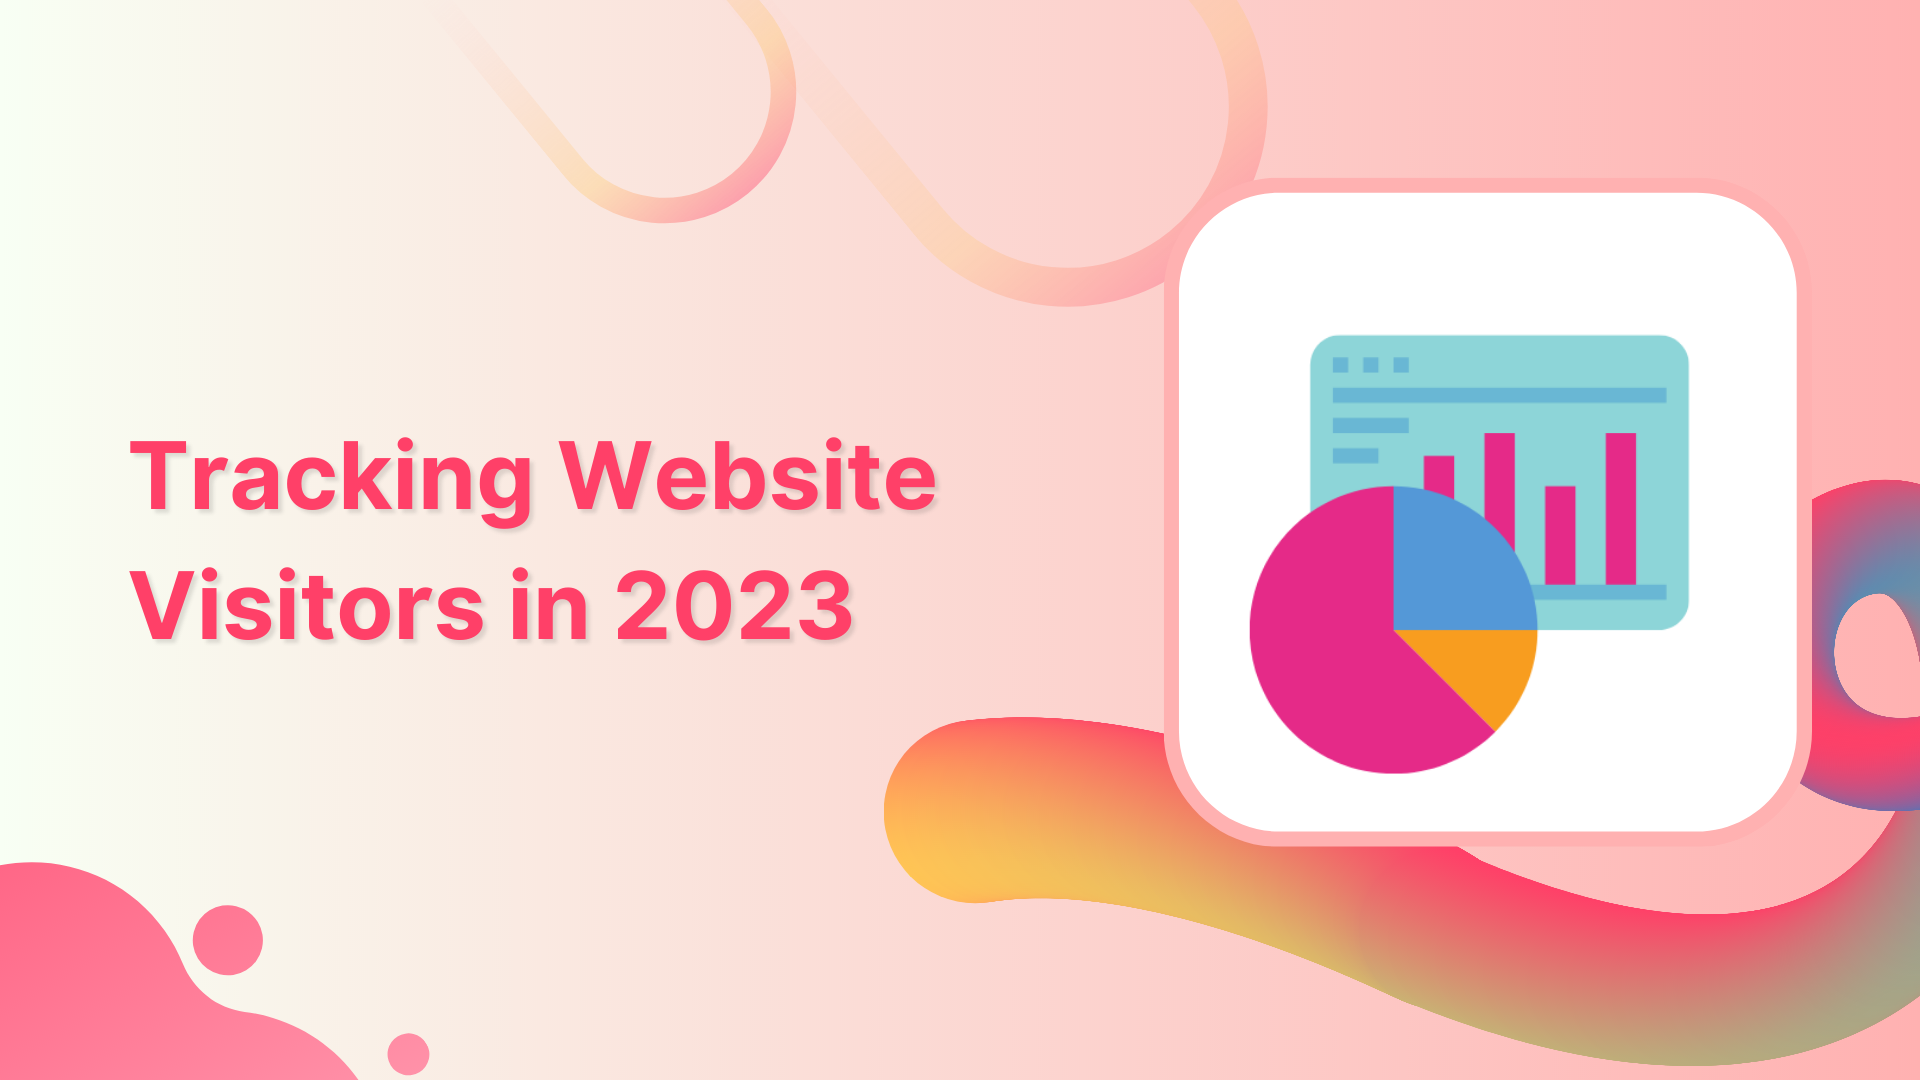 Guide To Tracking Website Visitors & Top 6 Tools for 2023